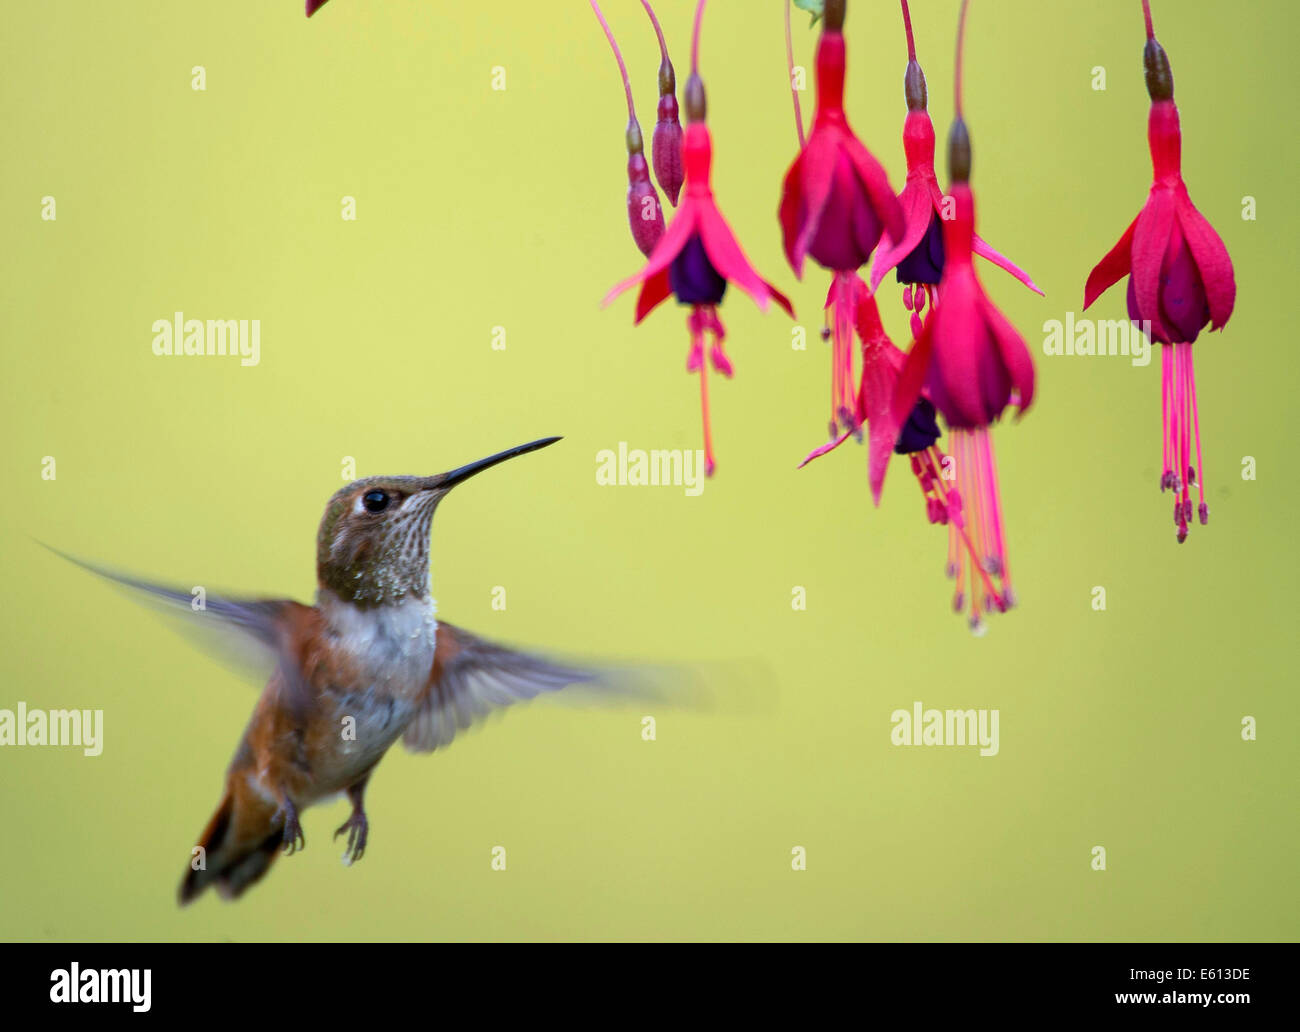 Elkton, Oregon, USA. 10th Aug, 2014. A rufous hummingbird feeds on ffuchsia flowers outside a home near Elkton in southwestern Oregon. Some rufous hummingbirds migrate thousands of miles from their summer homes in the Pacific Northwest and the Rocky Mountain states to wintering grounds in Mexico. © Robin Loznak/ZUMA Wire/Alamy Live News Stock Photo